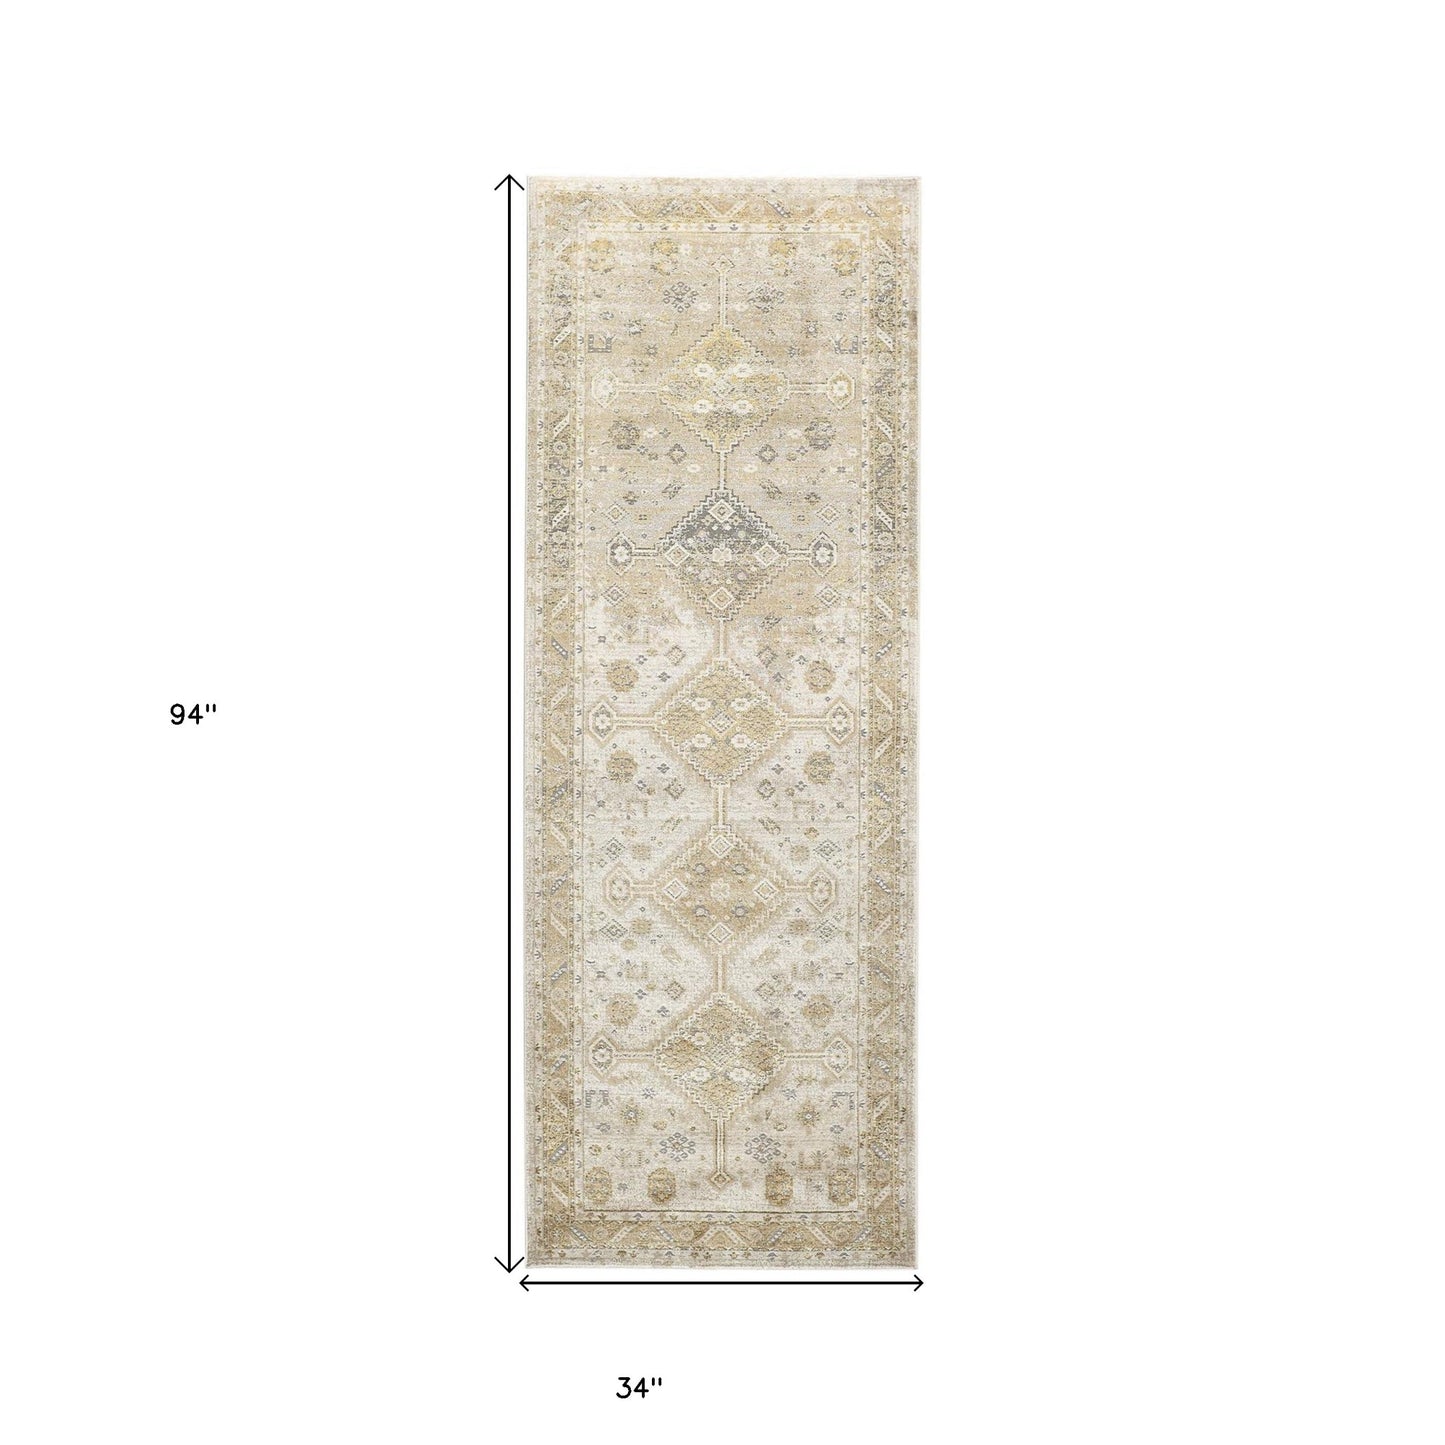 7' X 10' Gold And Ivory Floral Stain Resistant Area Rug